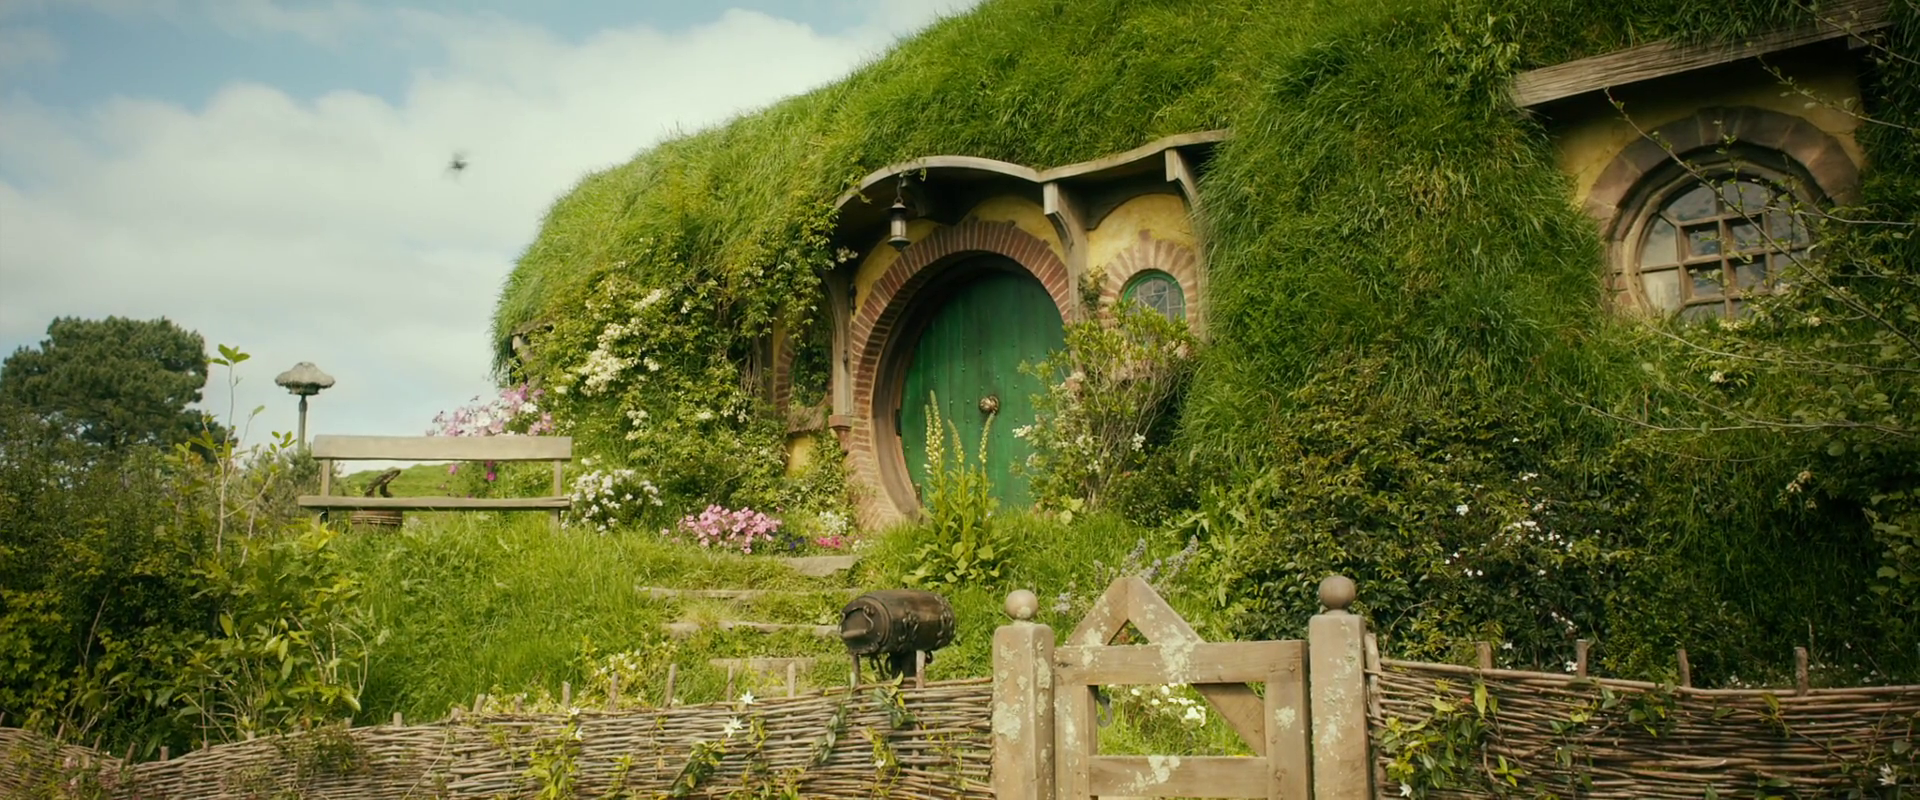 Image result for the hobbit hole movie